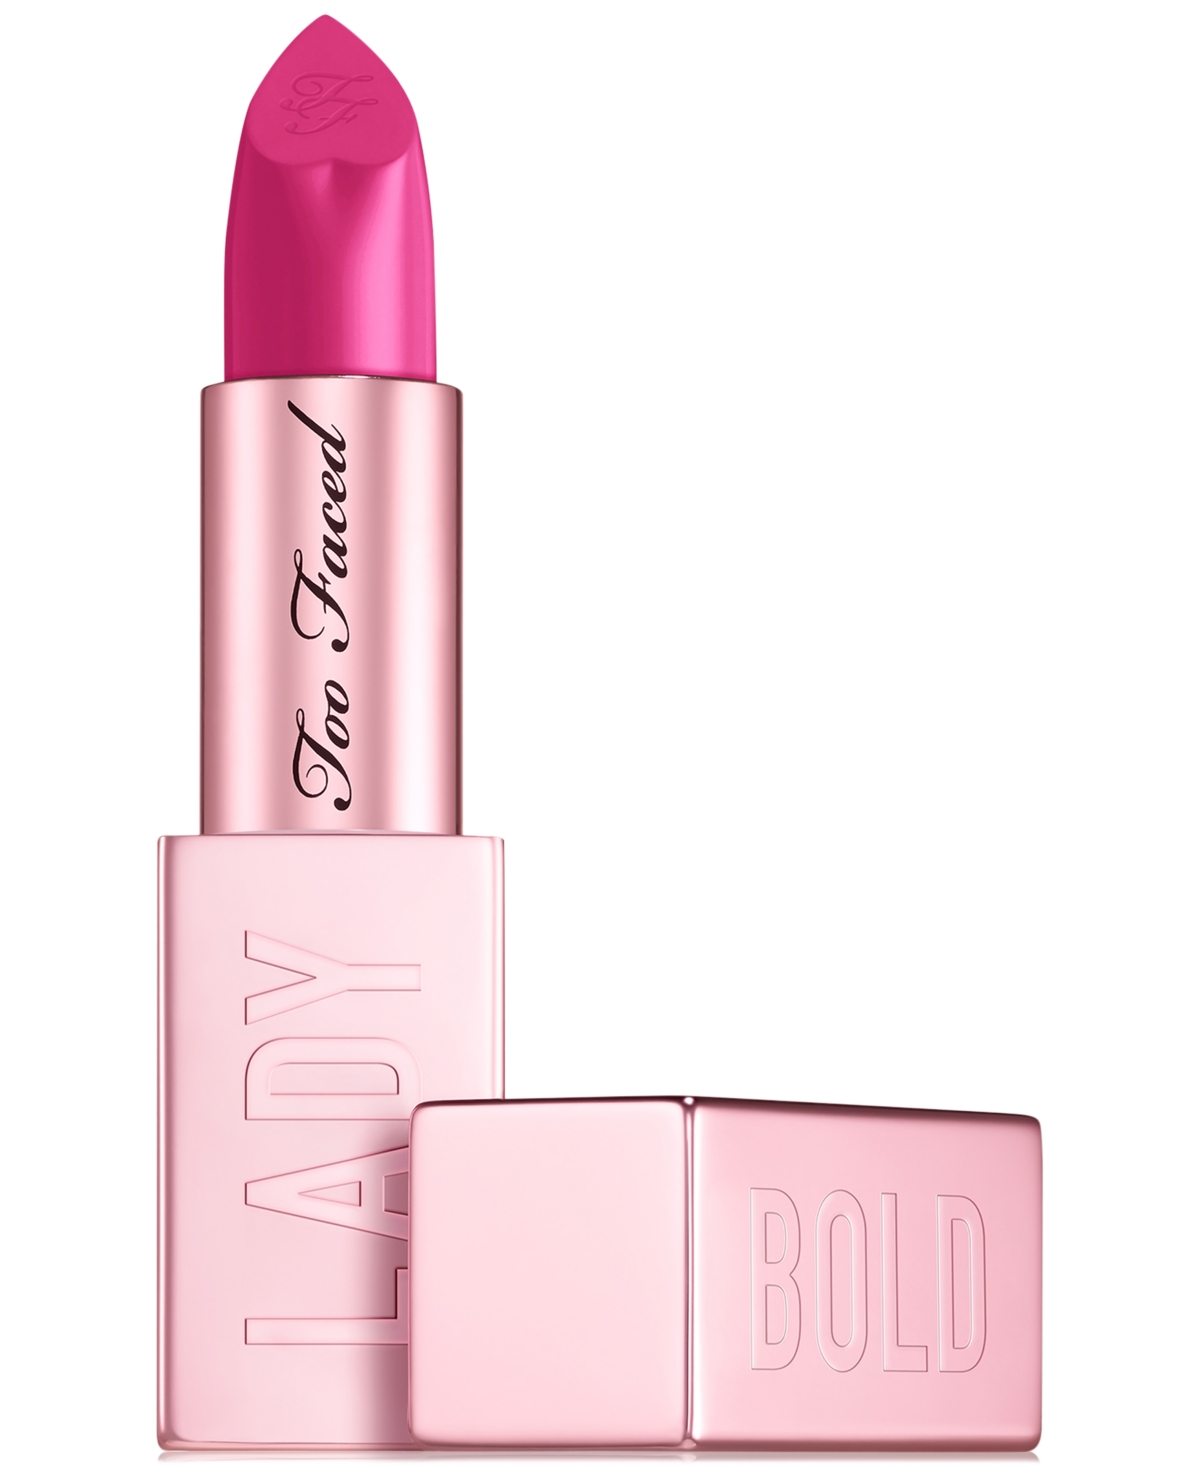 Too Faced Lady Bold Rich & Creamy High-impact Color Lipstick In Power Move